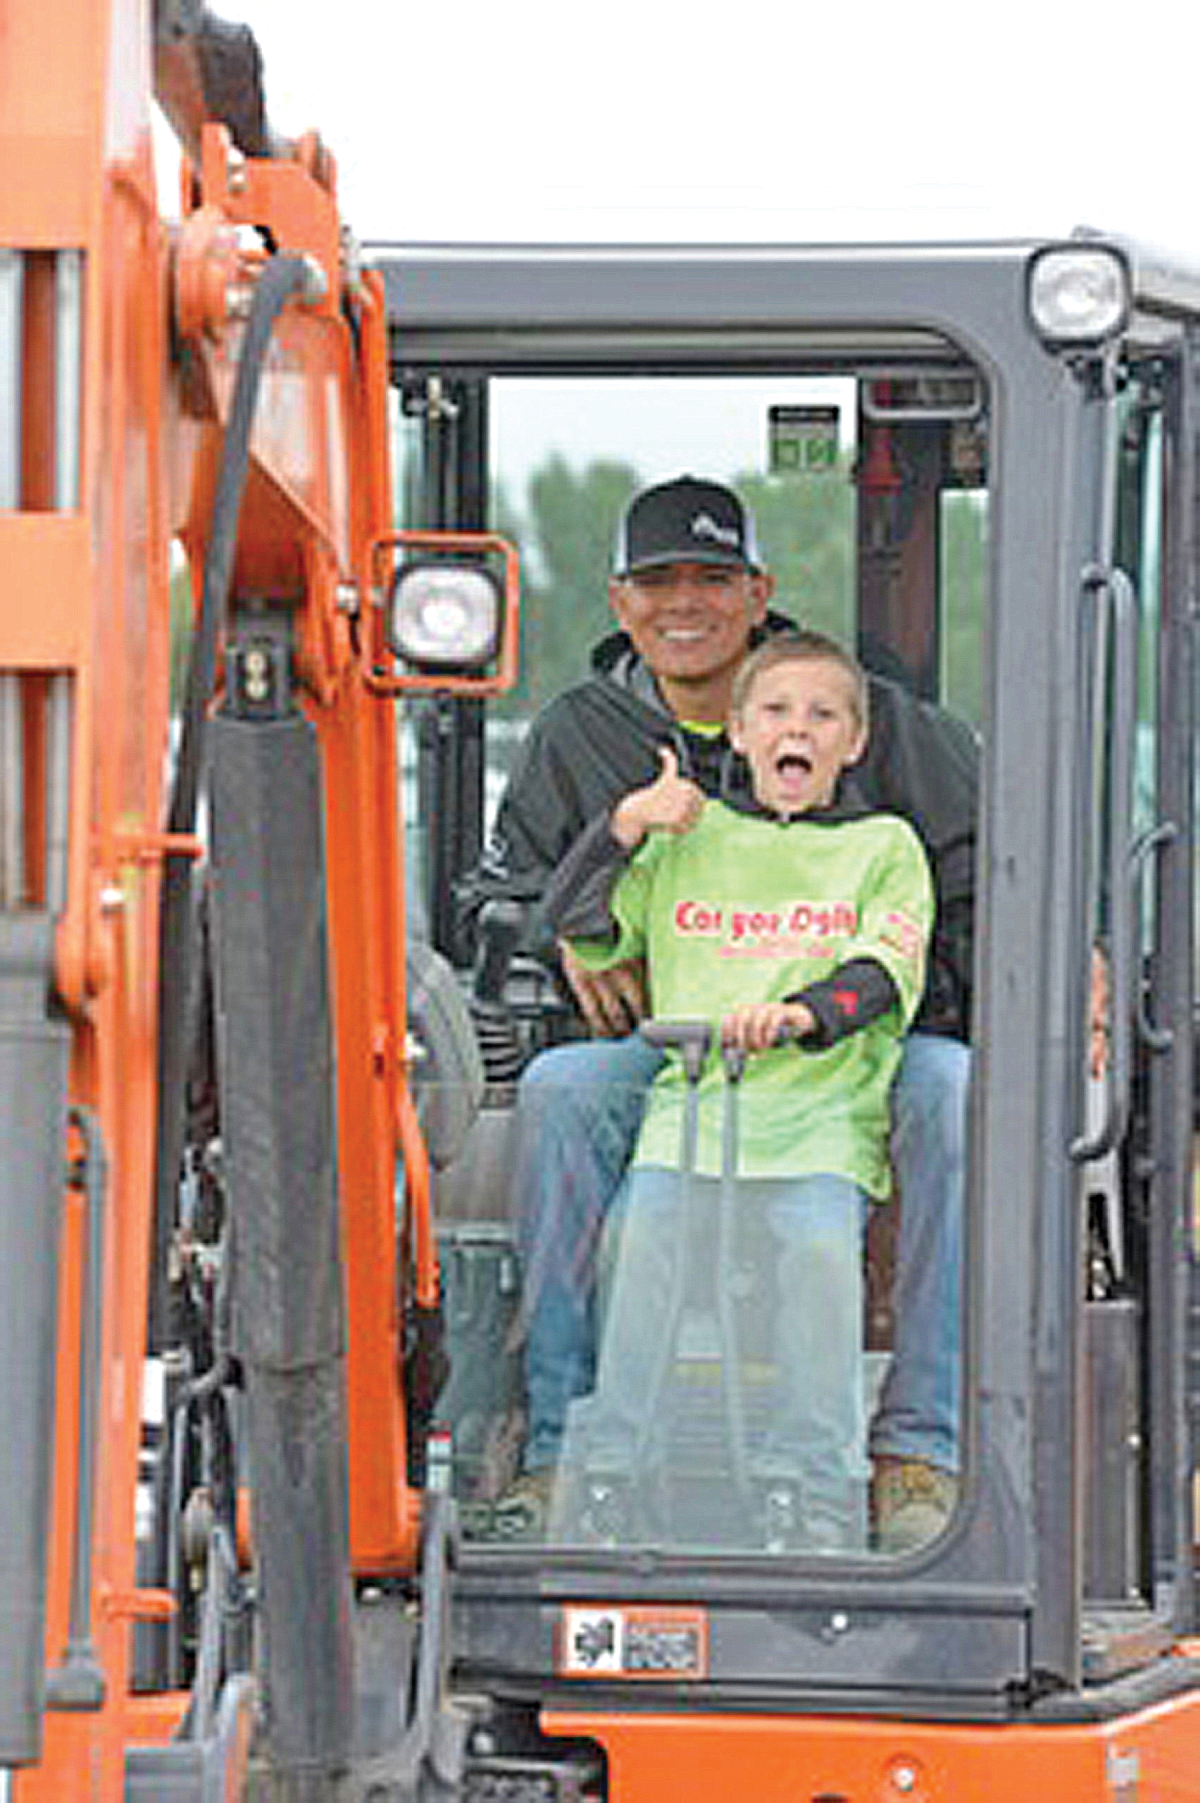 Get on Board for Dig It Days!